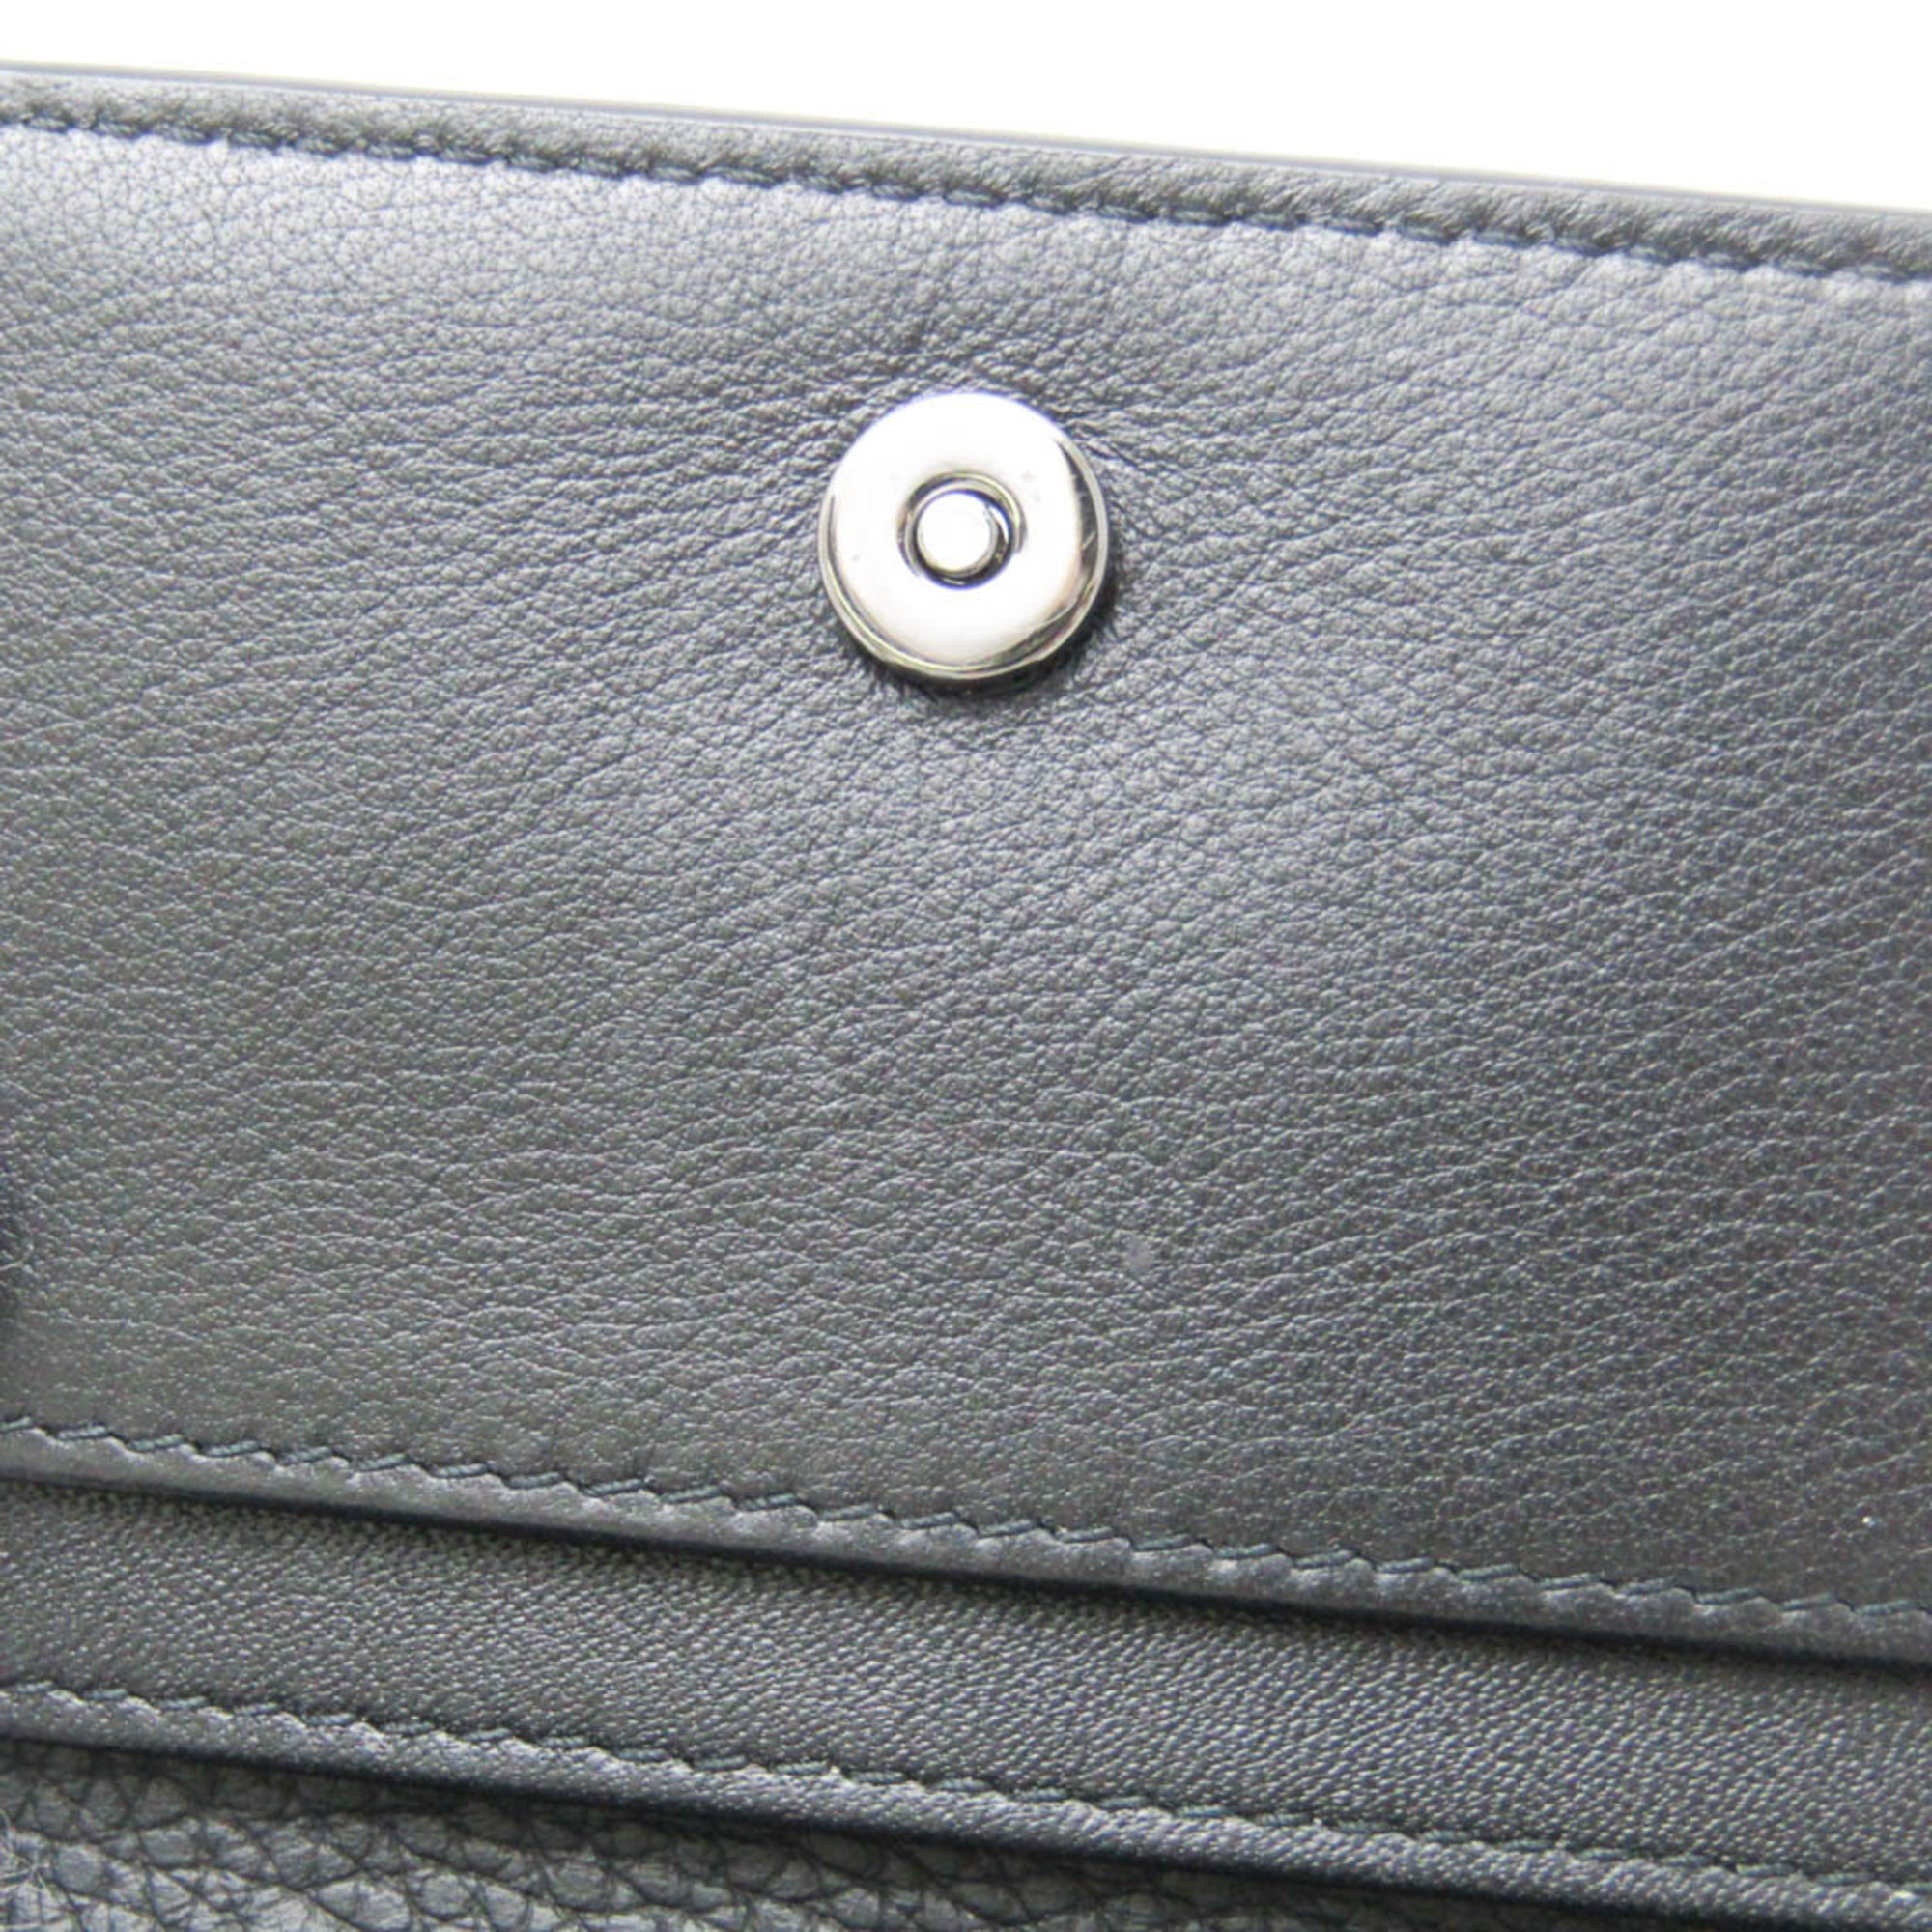 Christian Dior Leather Business Card Case Black